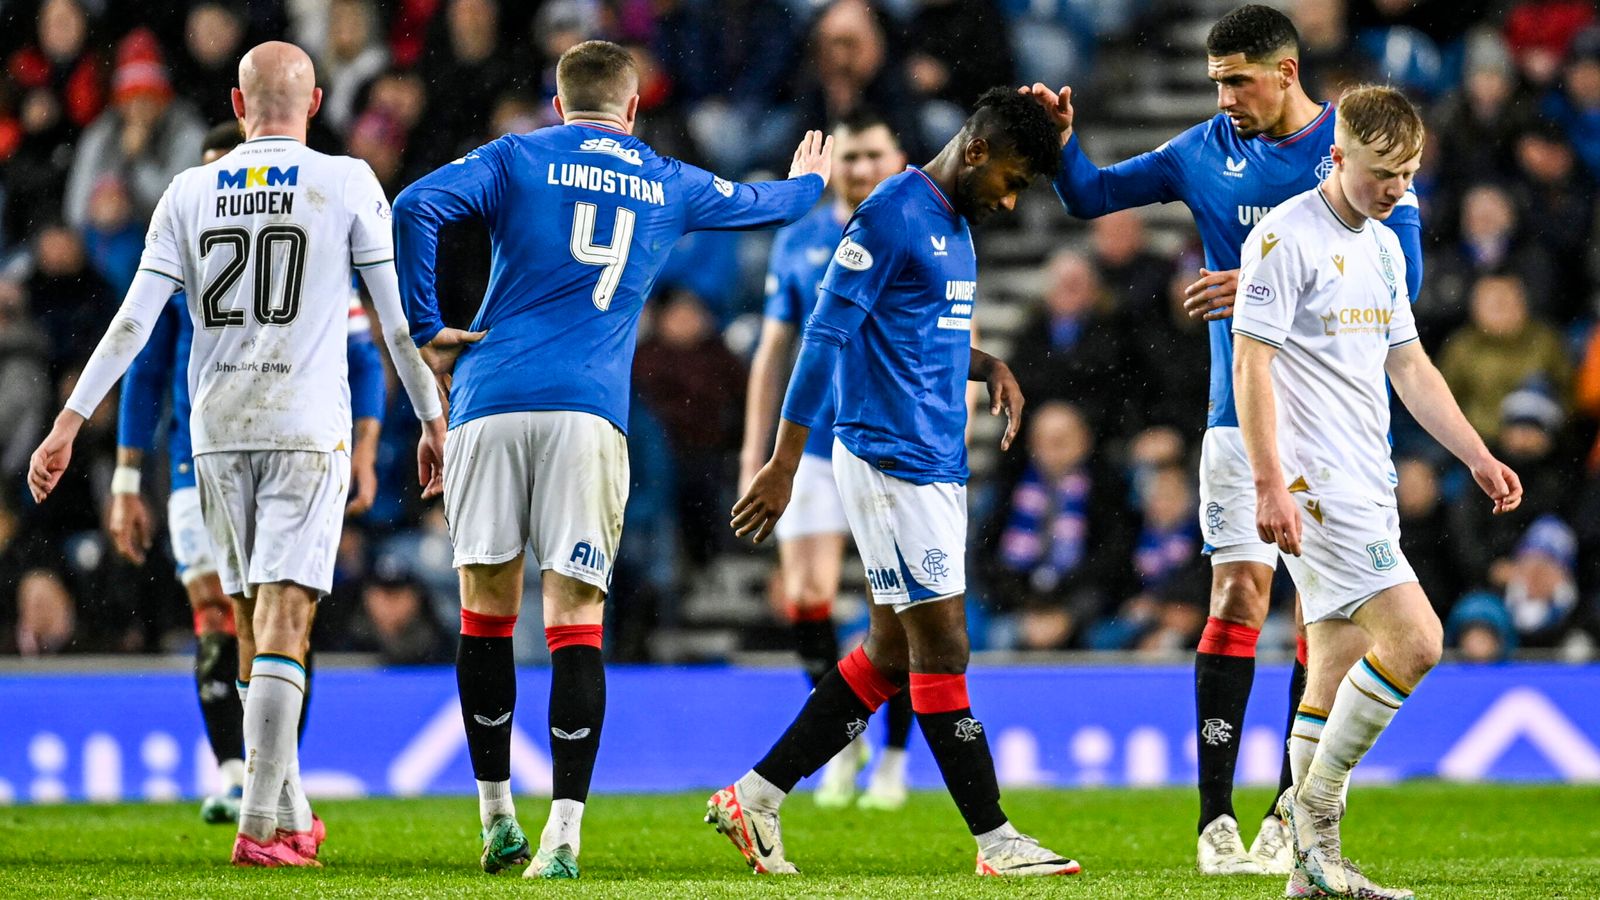 Rangers 3-1 Dundee: Jose Cifuentes sent off as Gers narrow the gap on  Celtic | Football News | Sky Sports